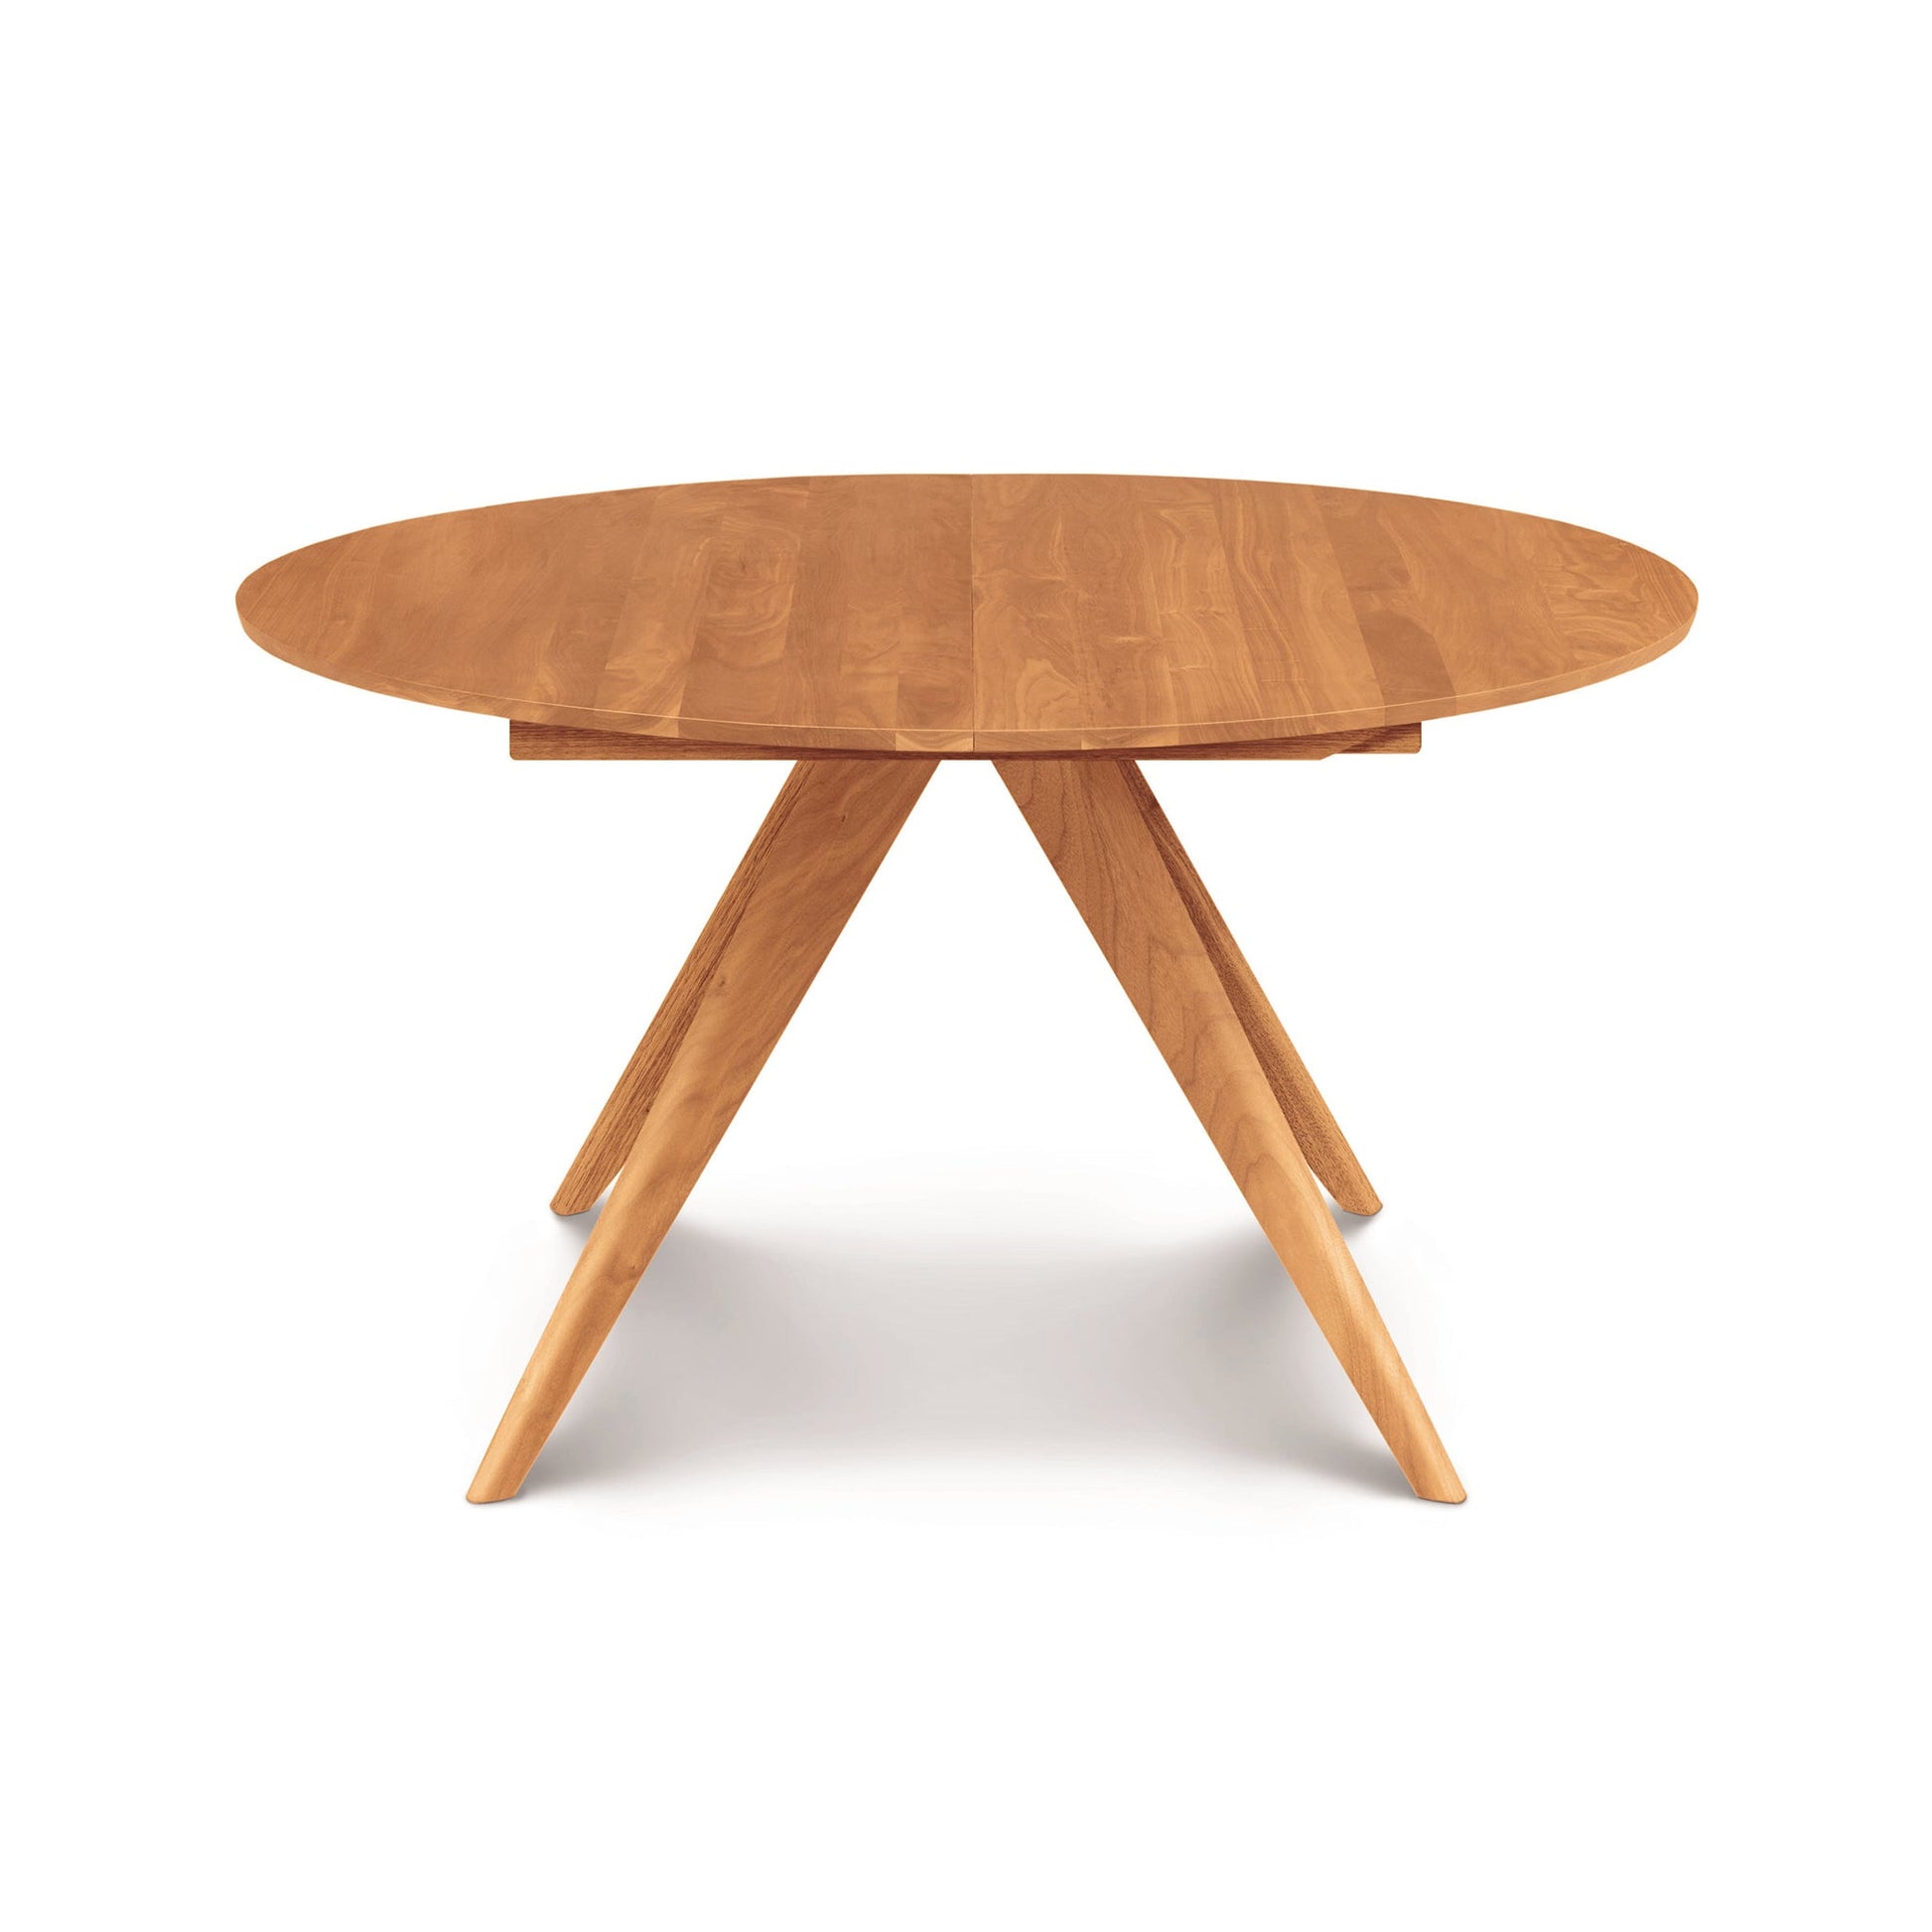 A round wooden table with three legs on a white background.